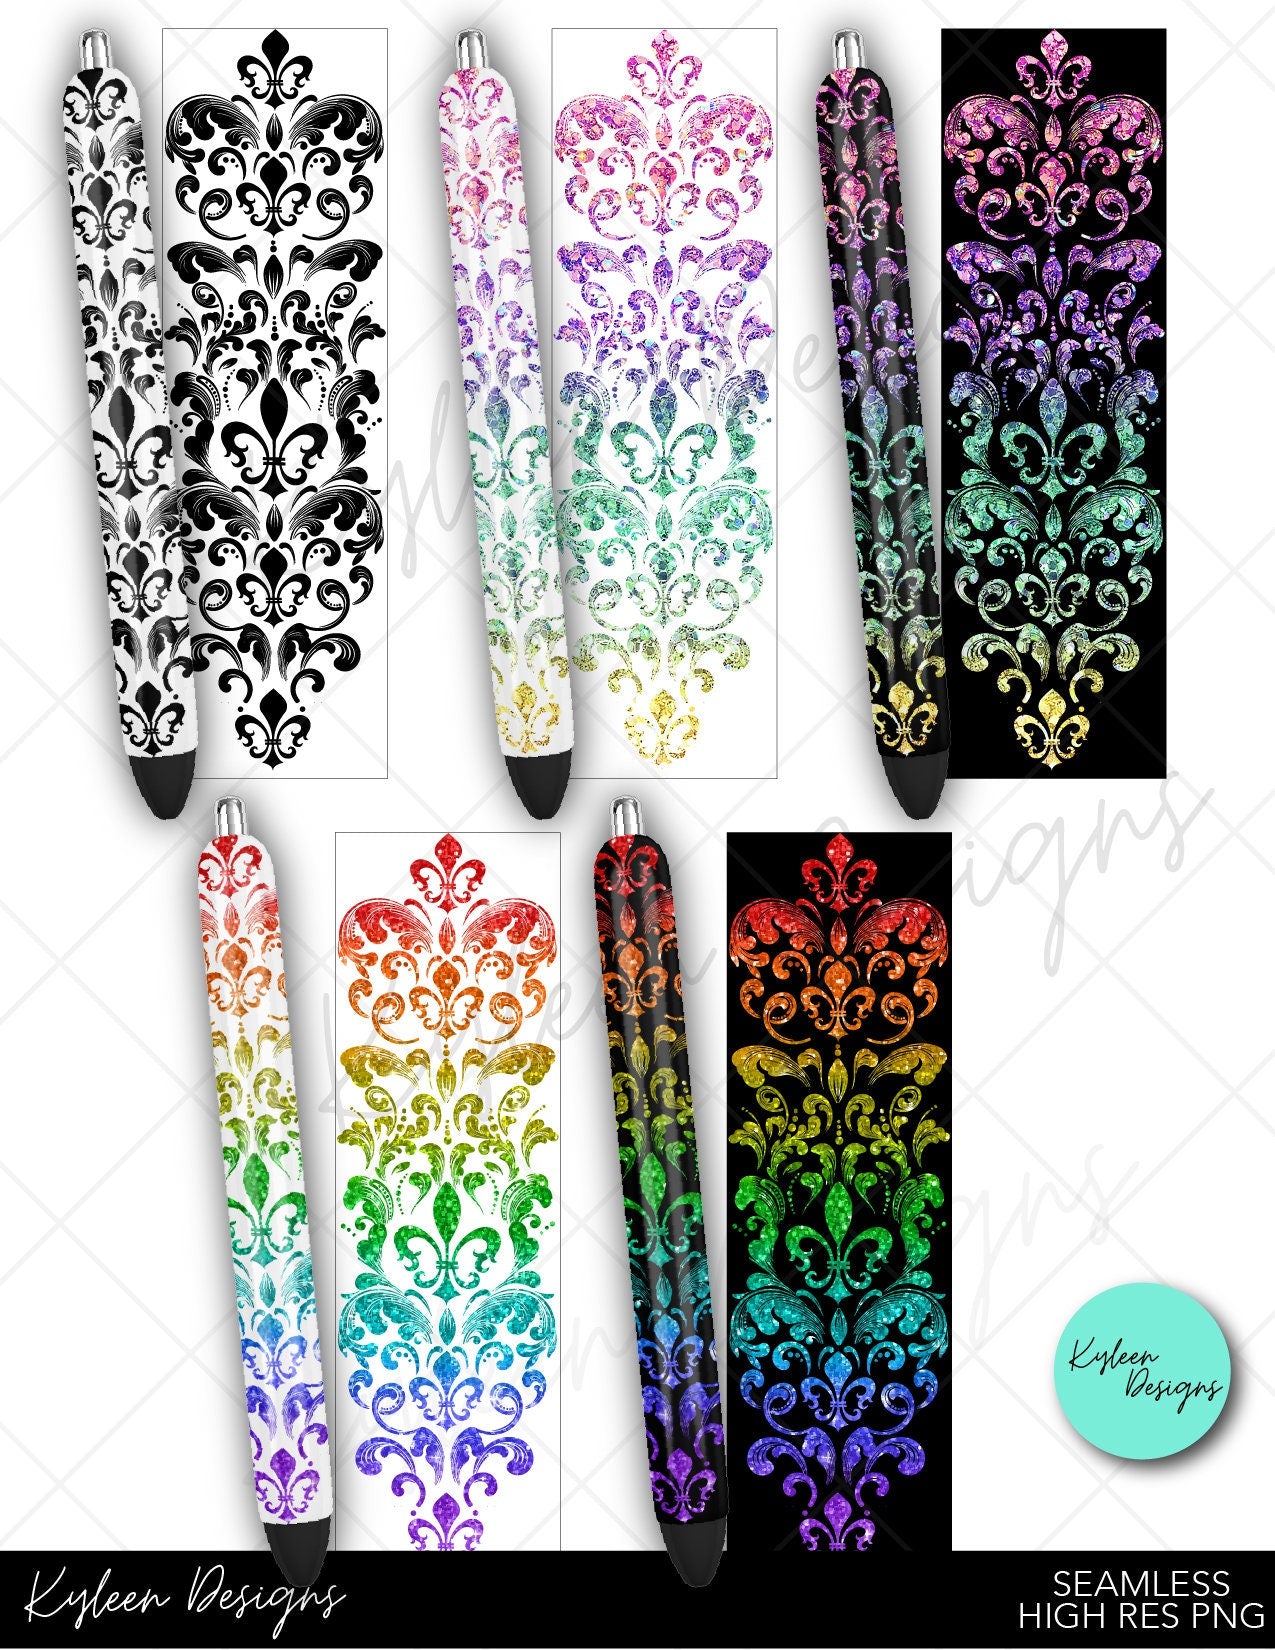 SEAMLESS Fleur di lis glitter pen wraps for waterslide high RES PNG